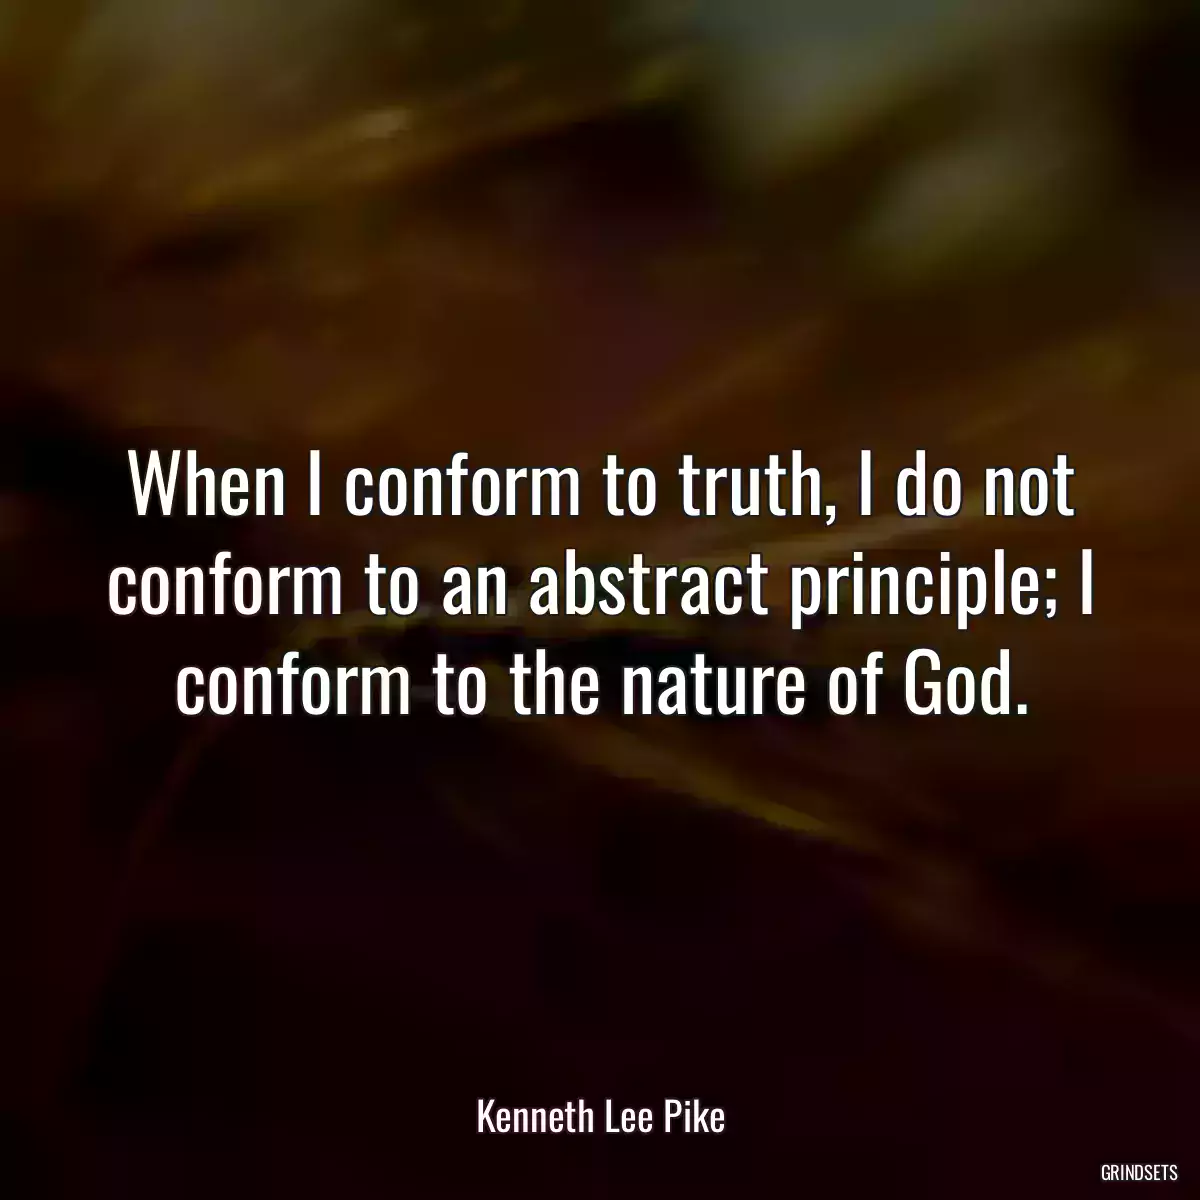 When I conform to truth, I do not conform to an abstract principle; I conform to the nature of God.